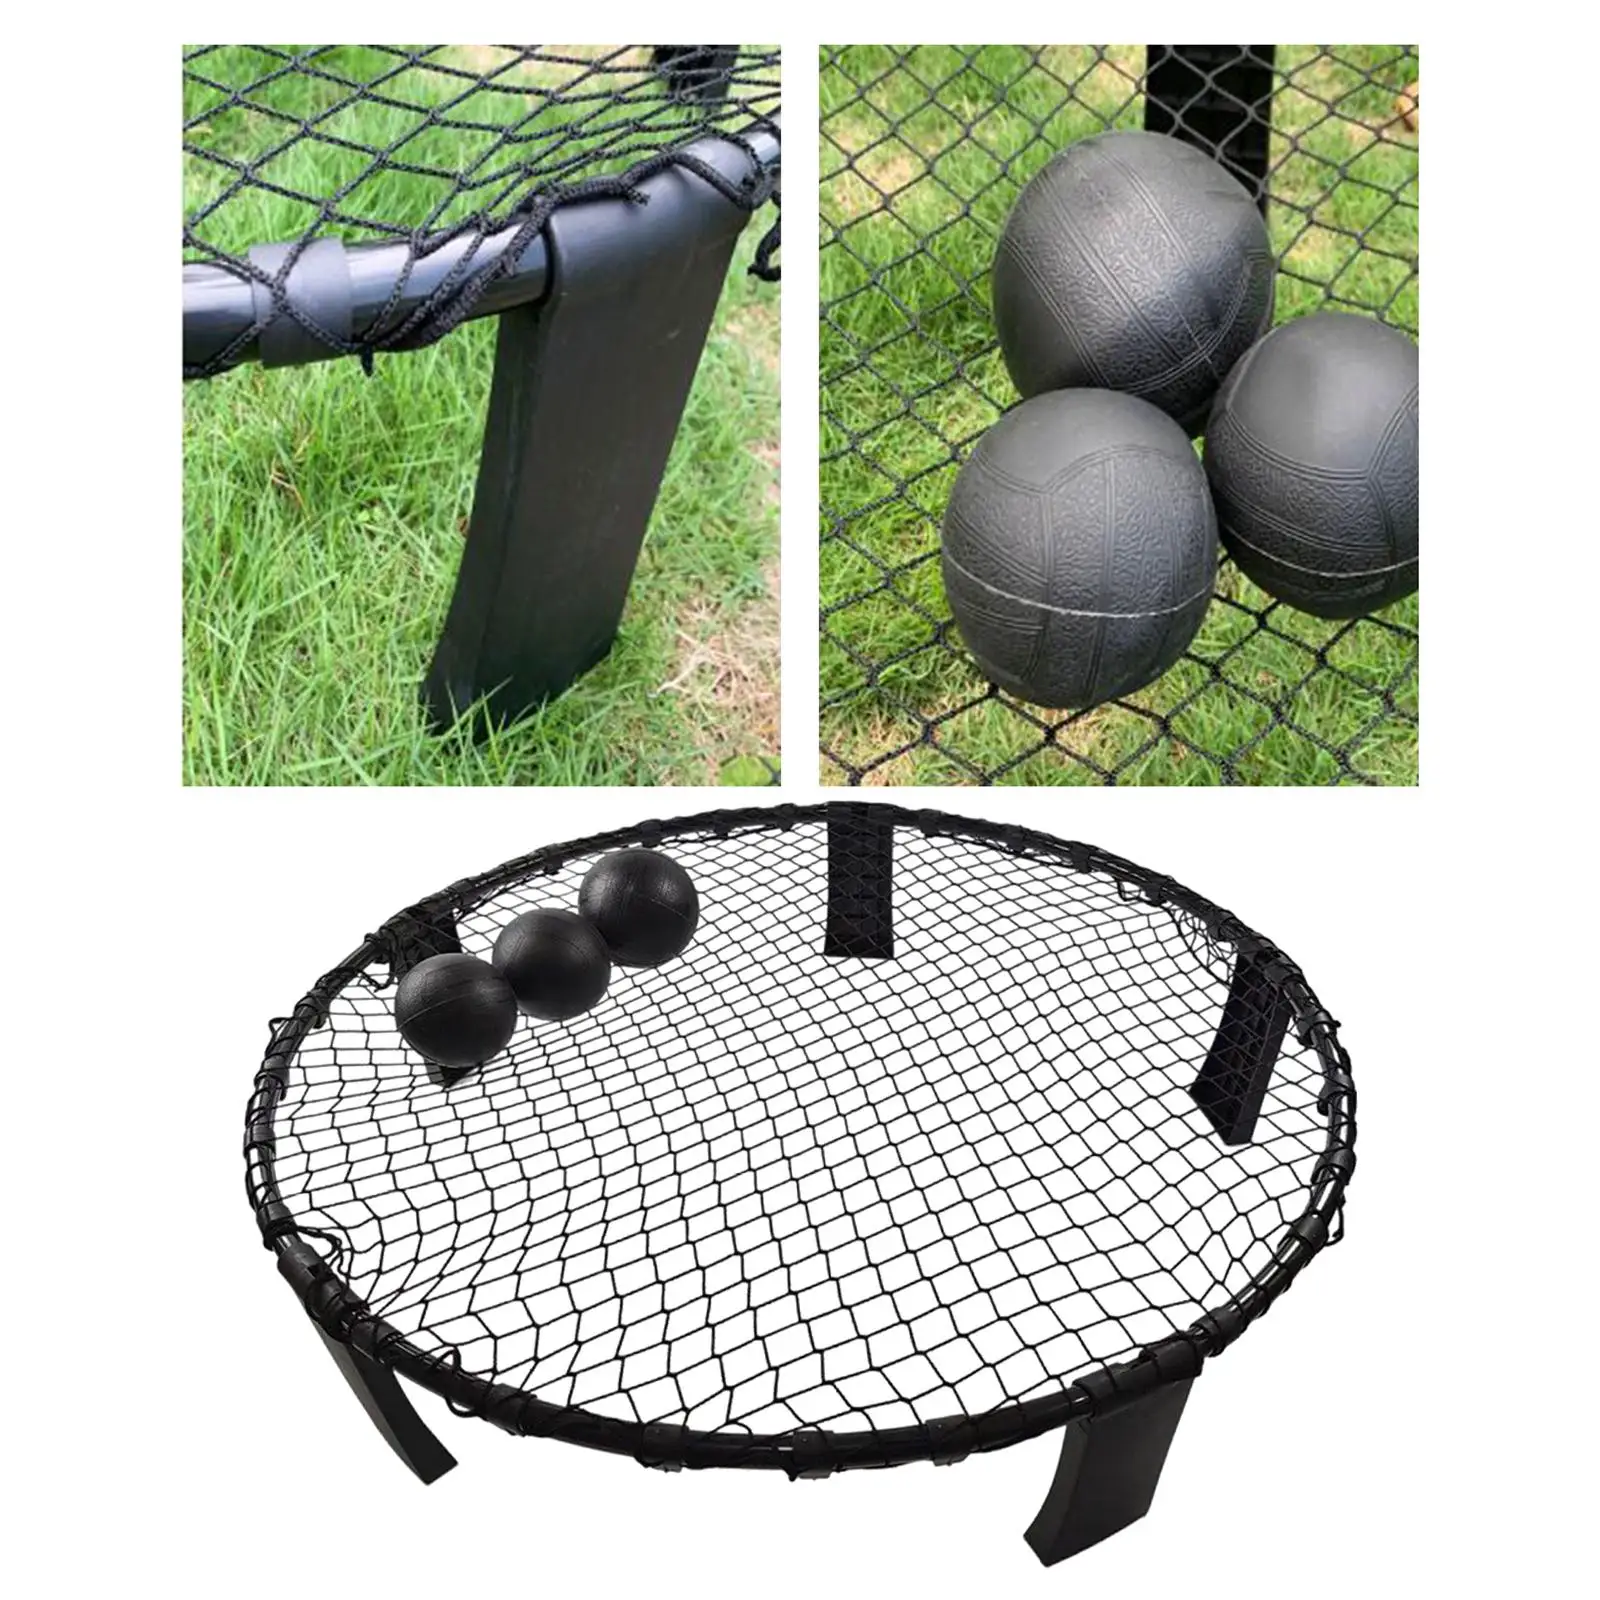 Beach Spike Game Set Outdoor Team Sports with 3 Balls Volleyball Net for Adults Family Summer Yard Lawn Fitness Equipment